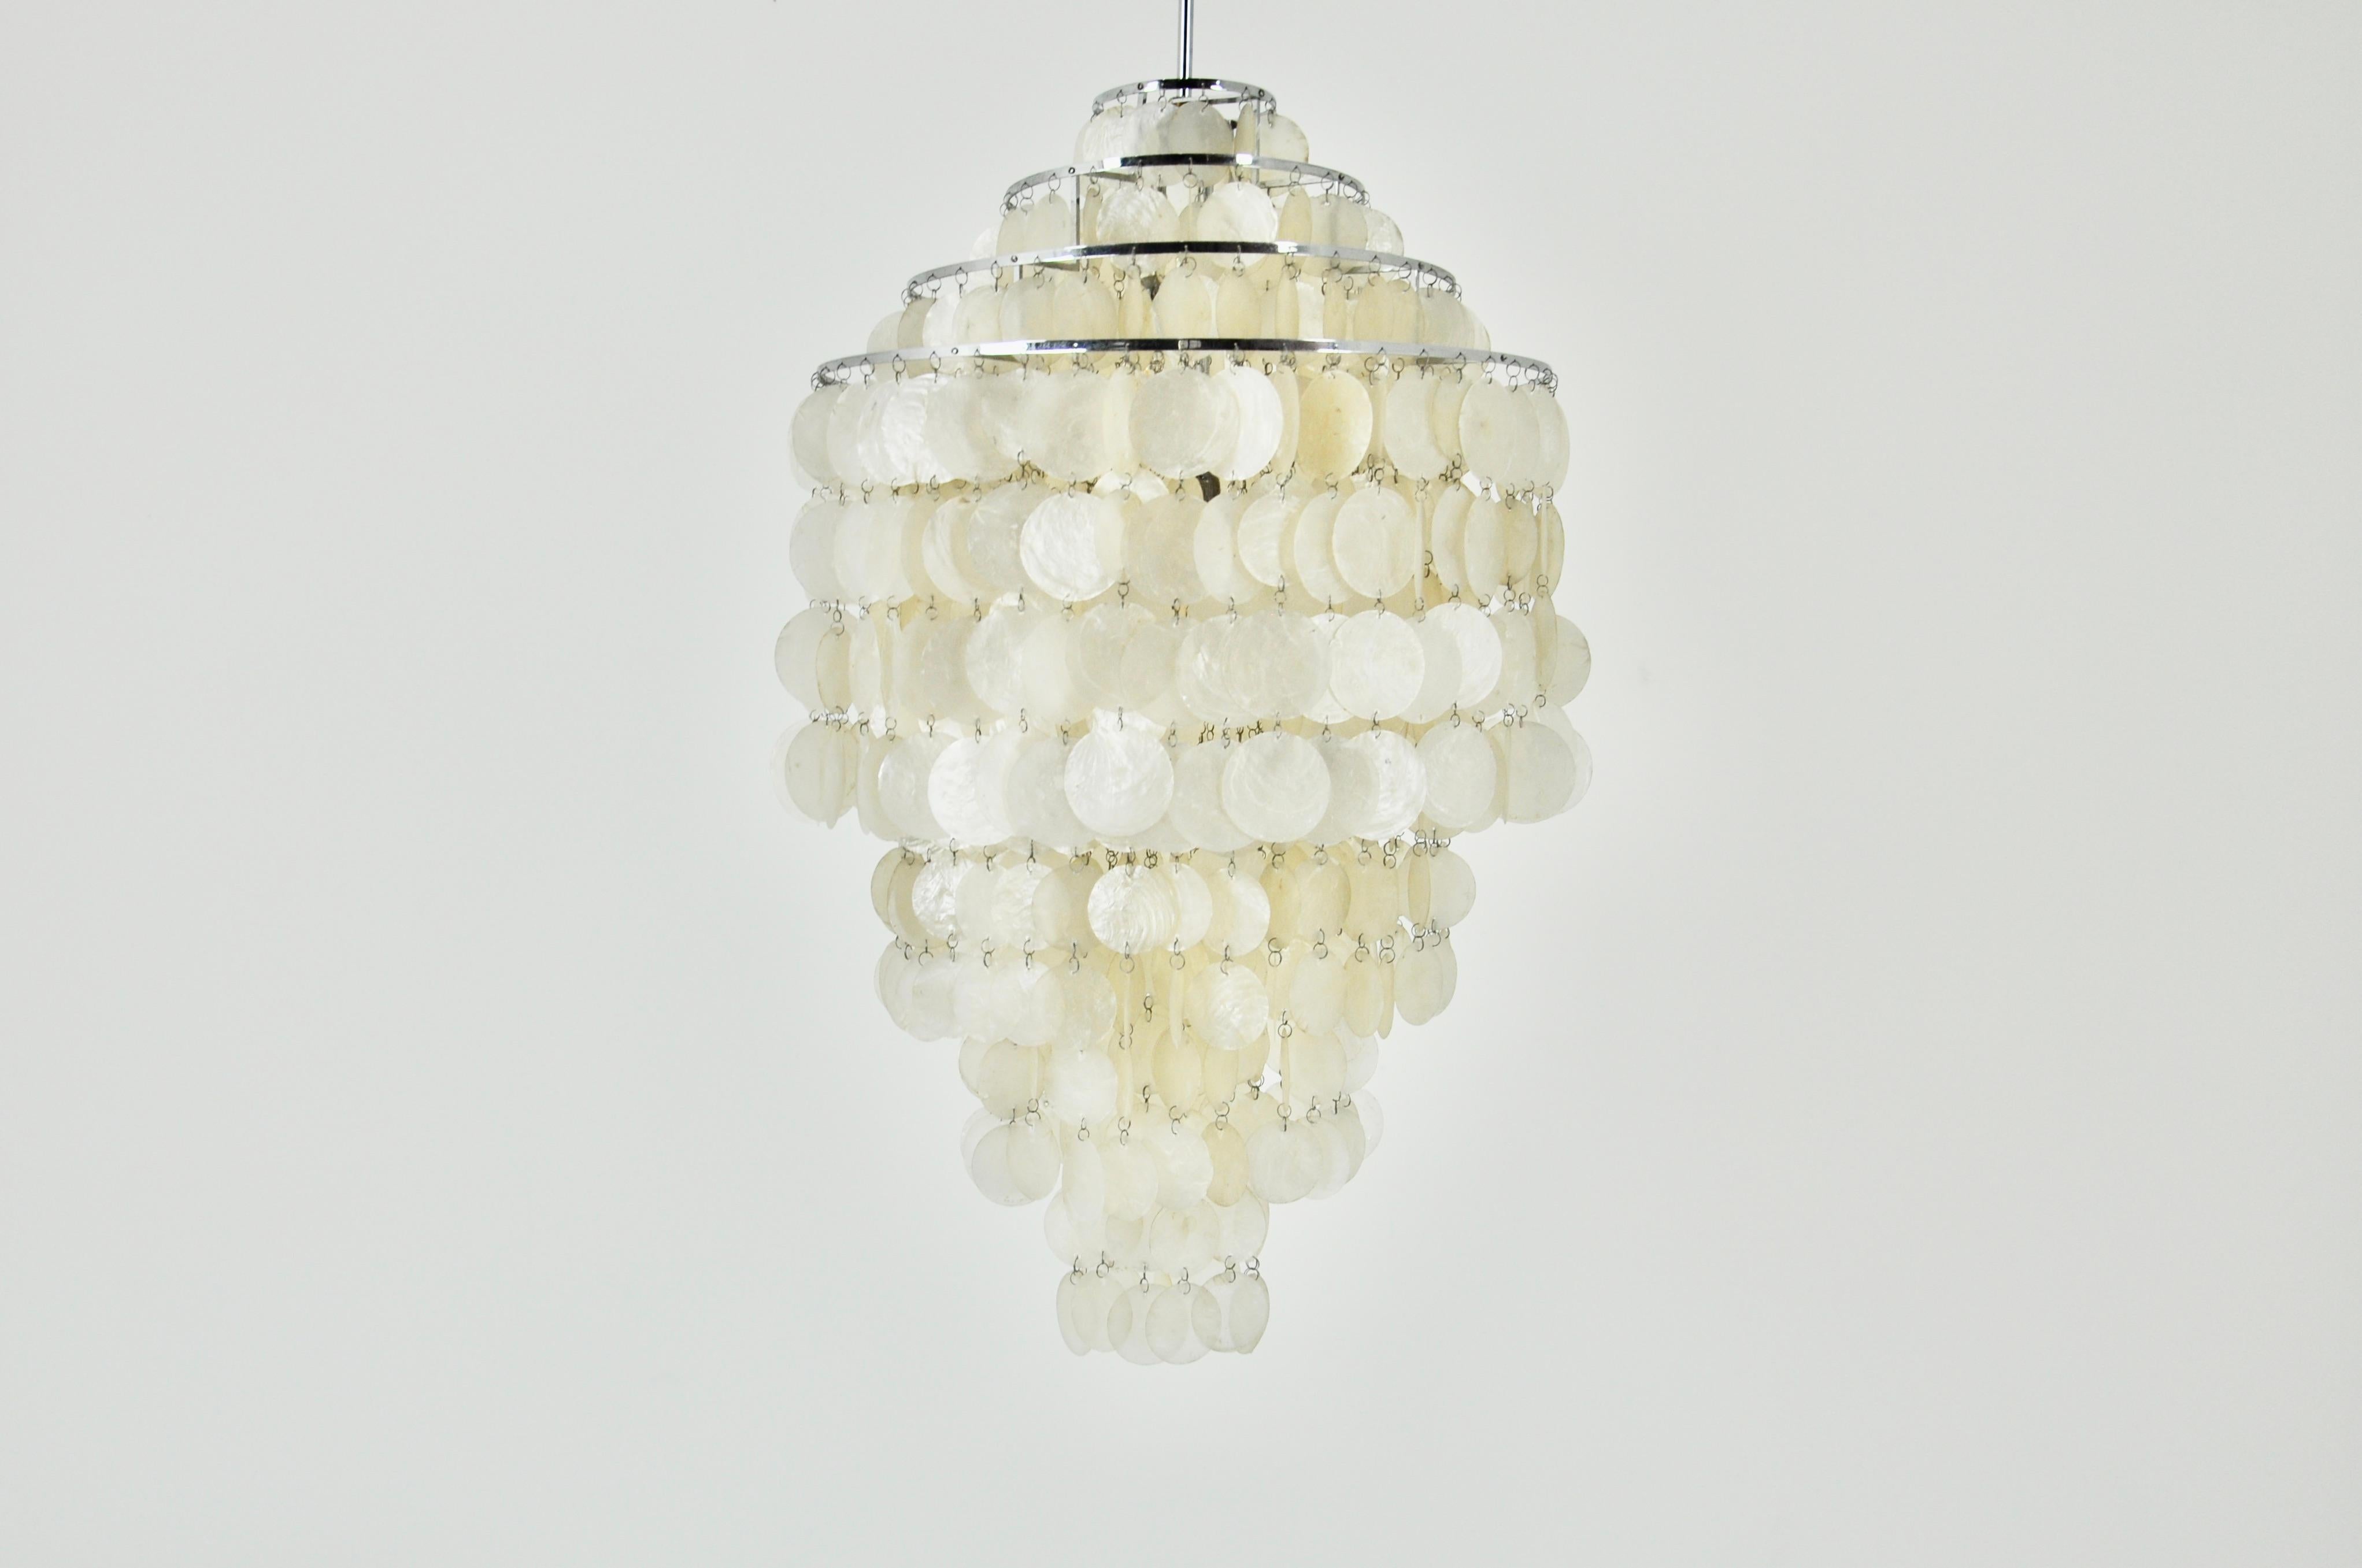 Mother of pearl and metal chandelier by Verner Panton. Wear due to time and age of the chandelier.